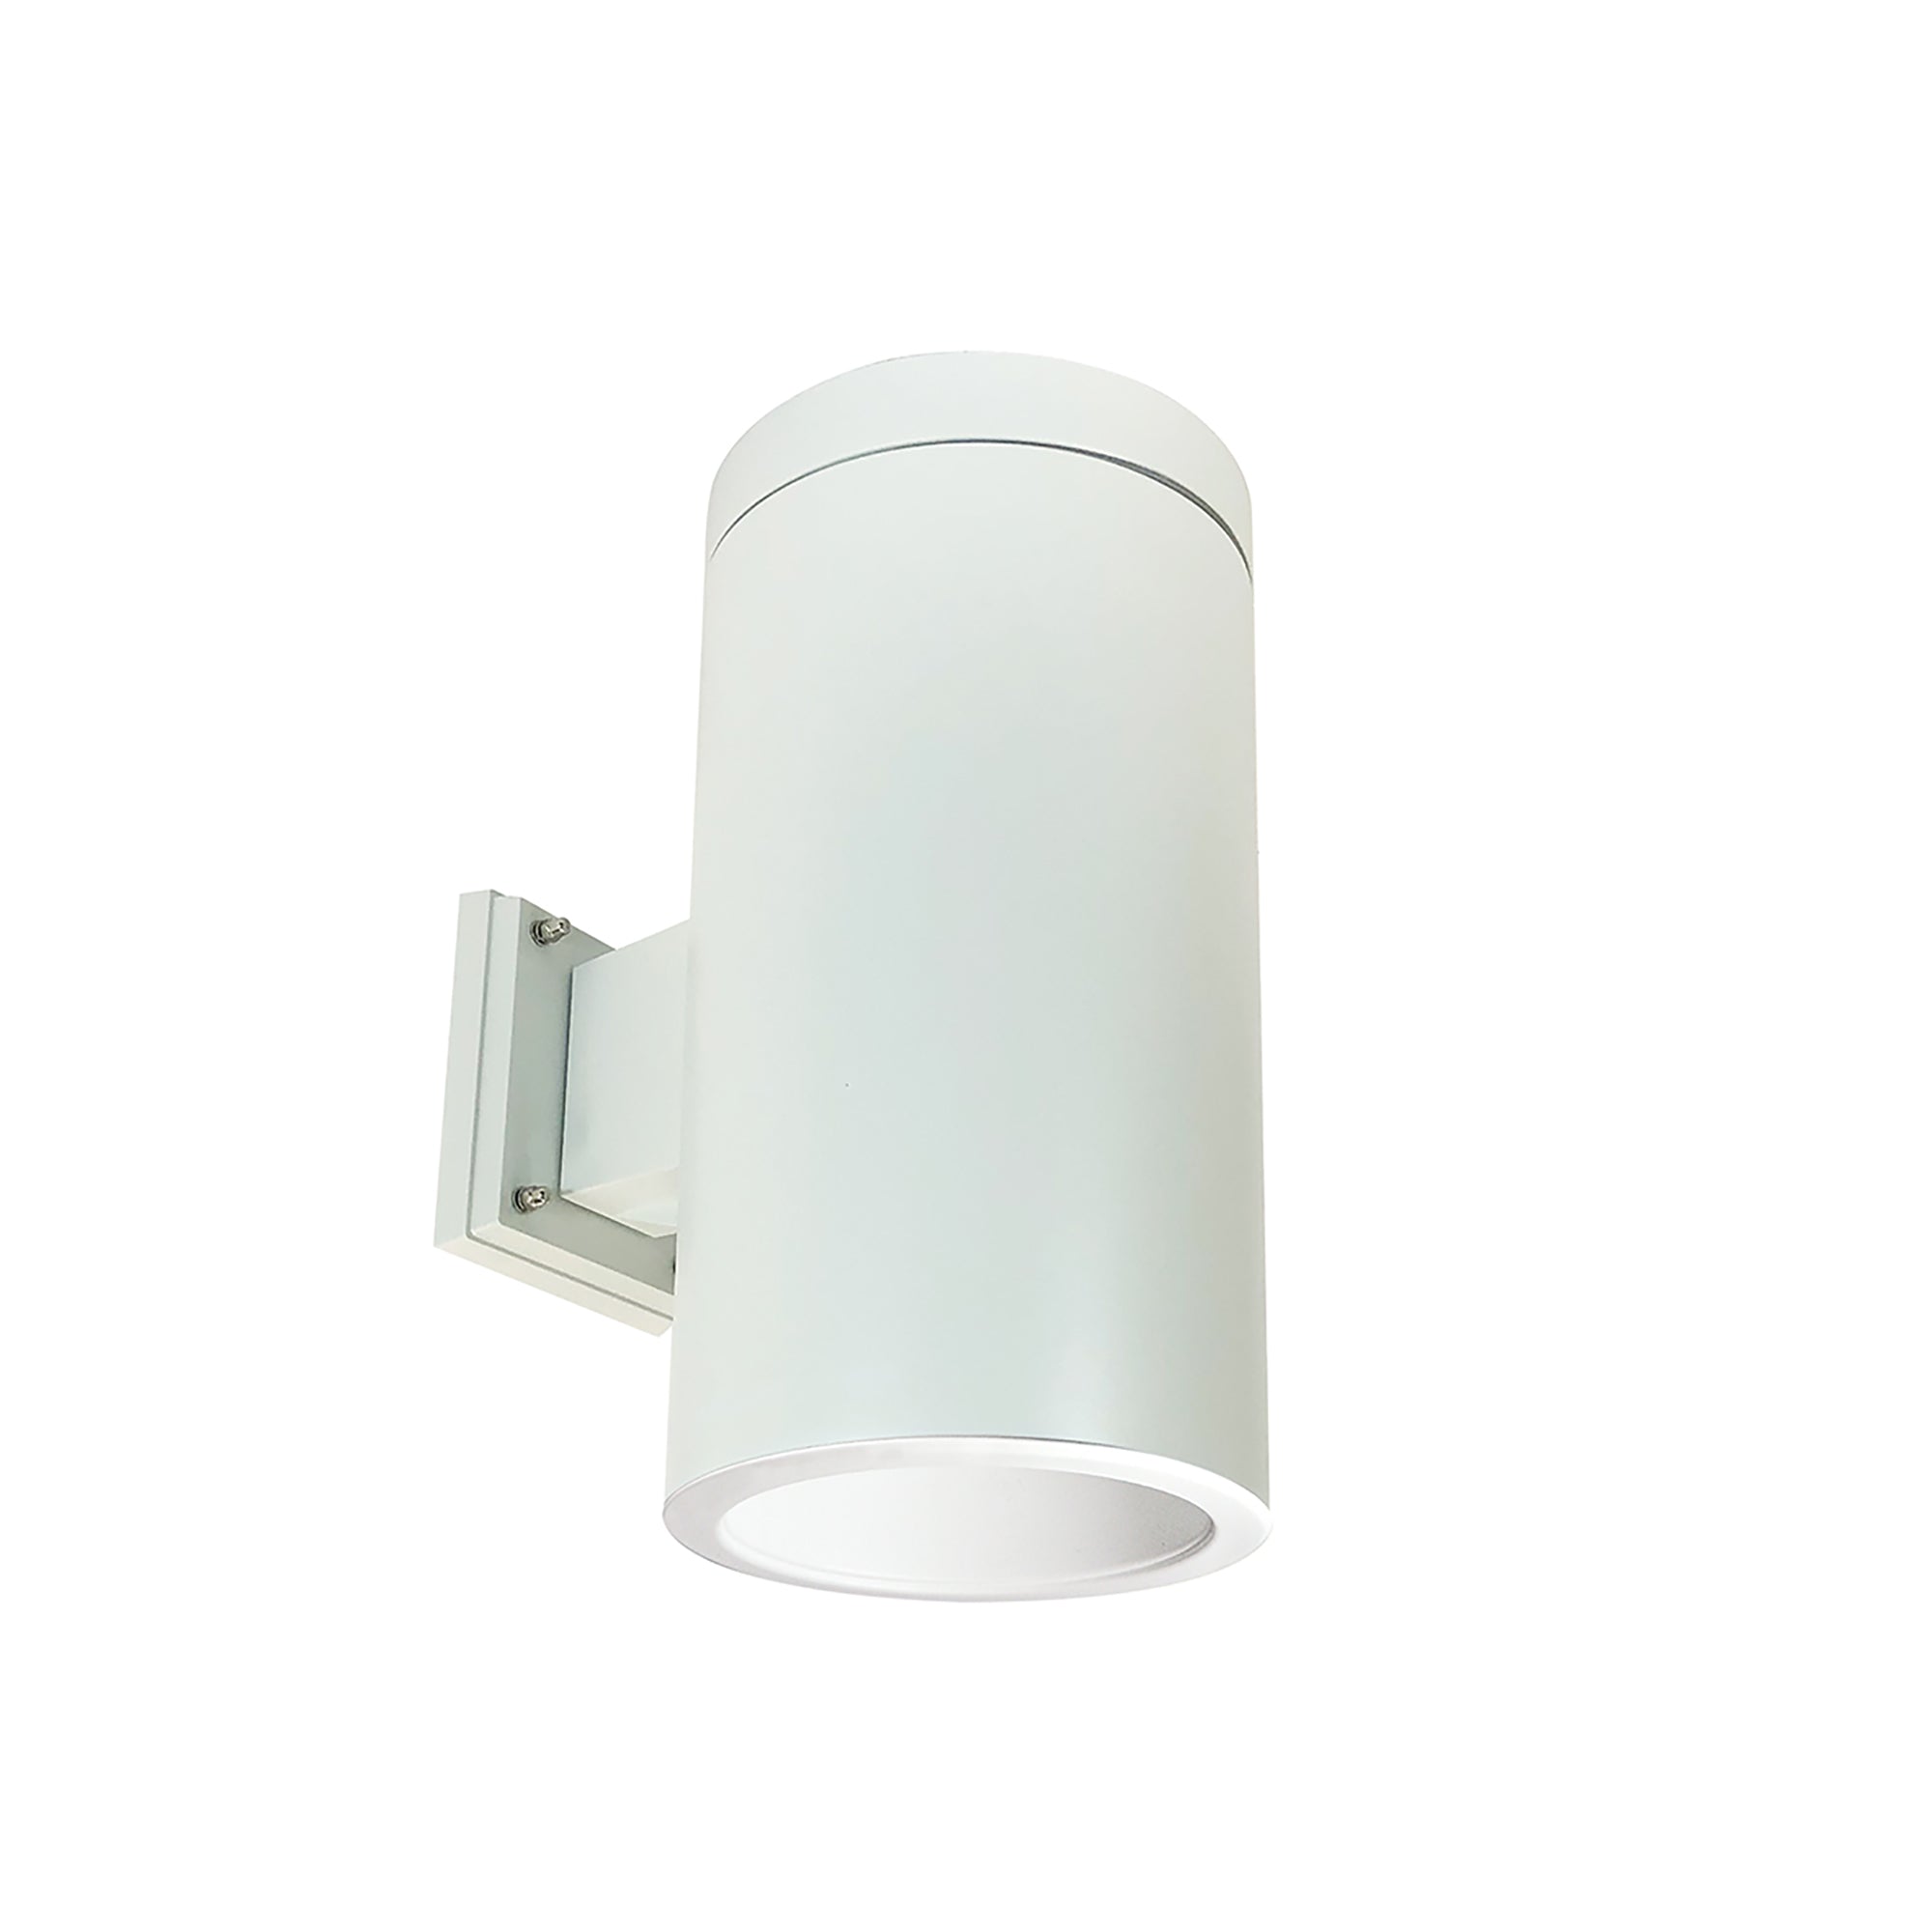 Nora Lighting NYLI-6WI1WWW - Cylinder - 6 Inch Cylinder, White, Wall Mount, Incandescent, Refl., White